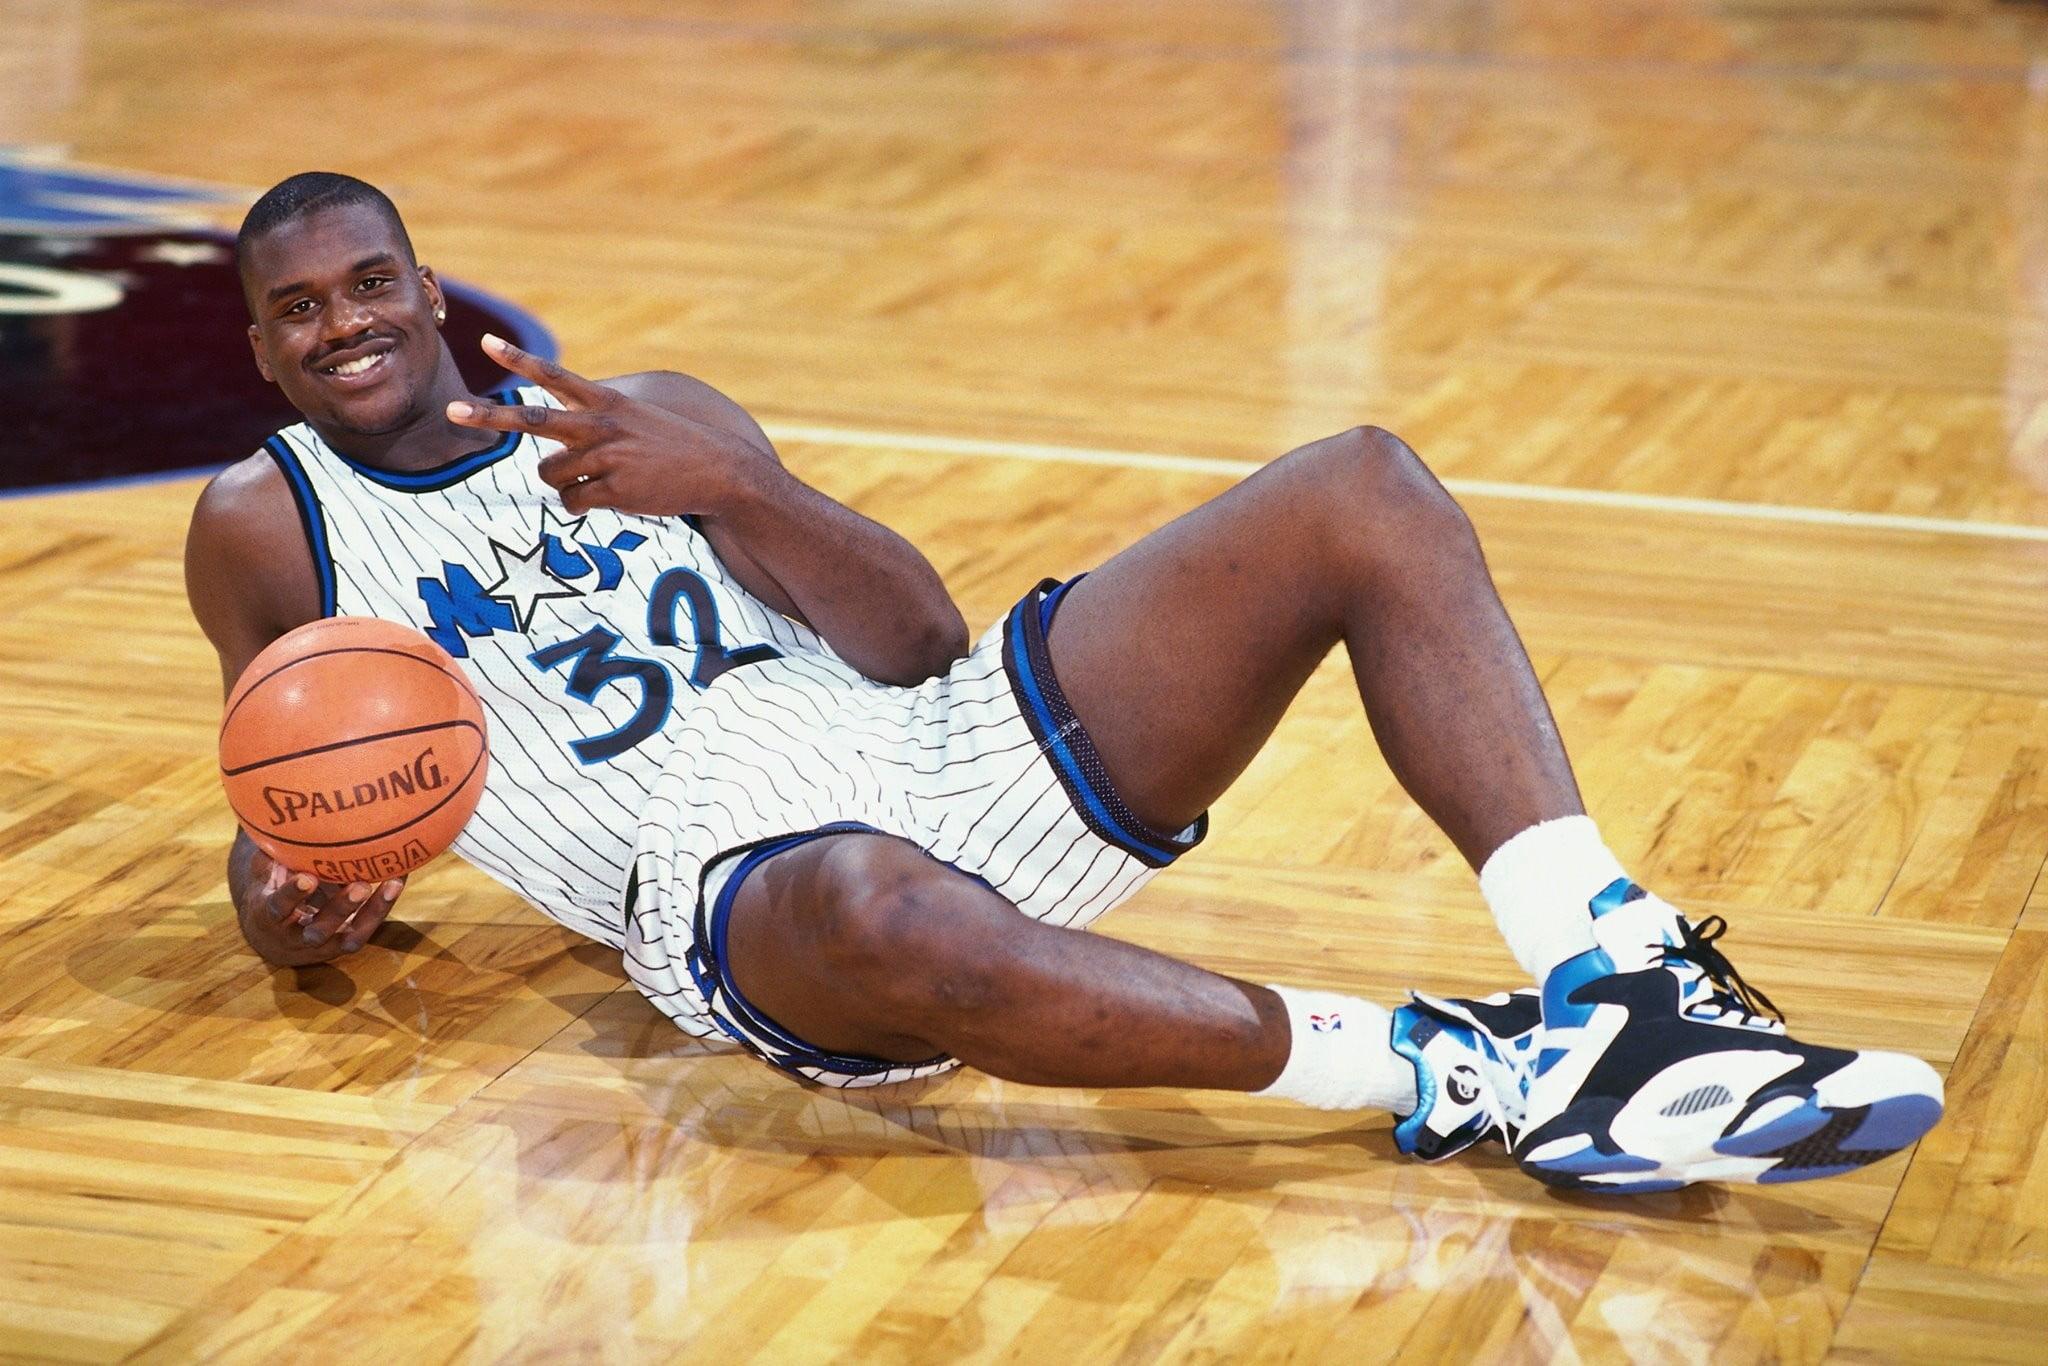 Shaquille O'Neal, basketball, Shaquille O'Neal, sports, NBA